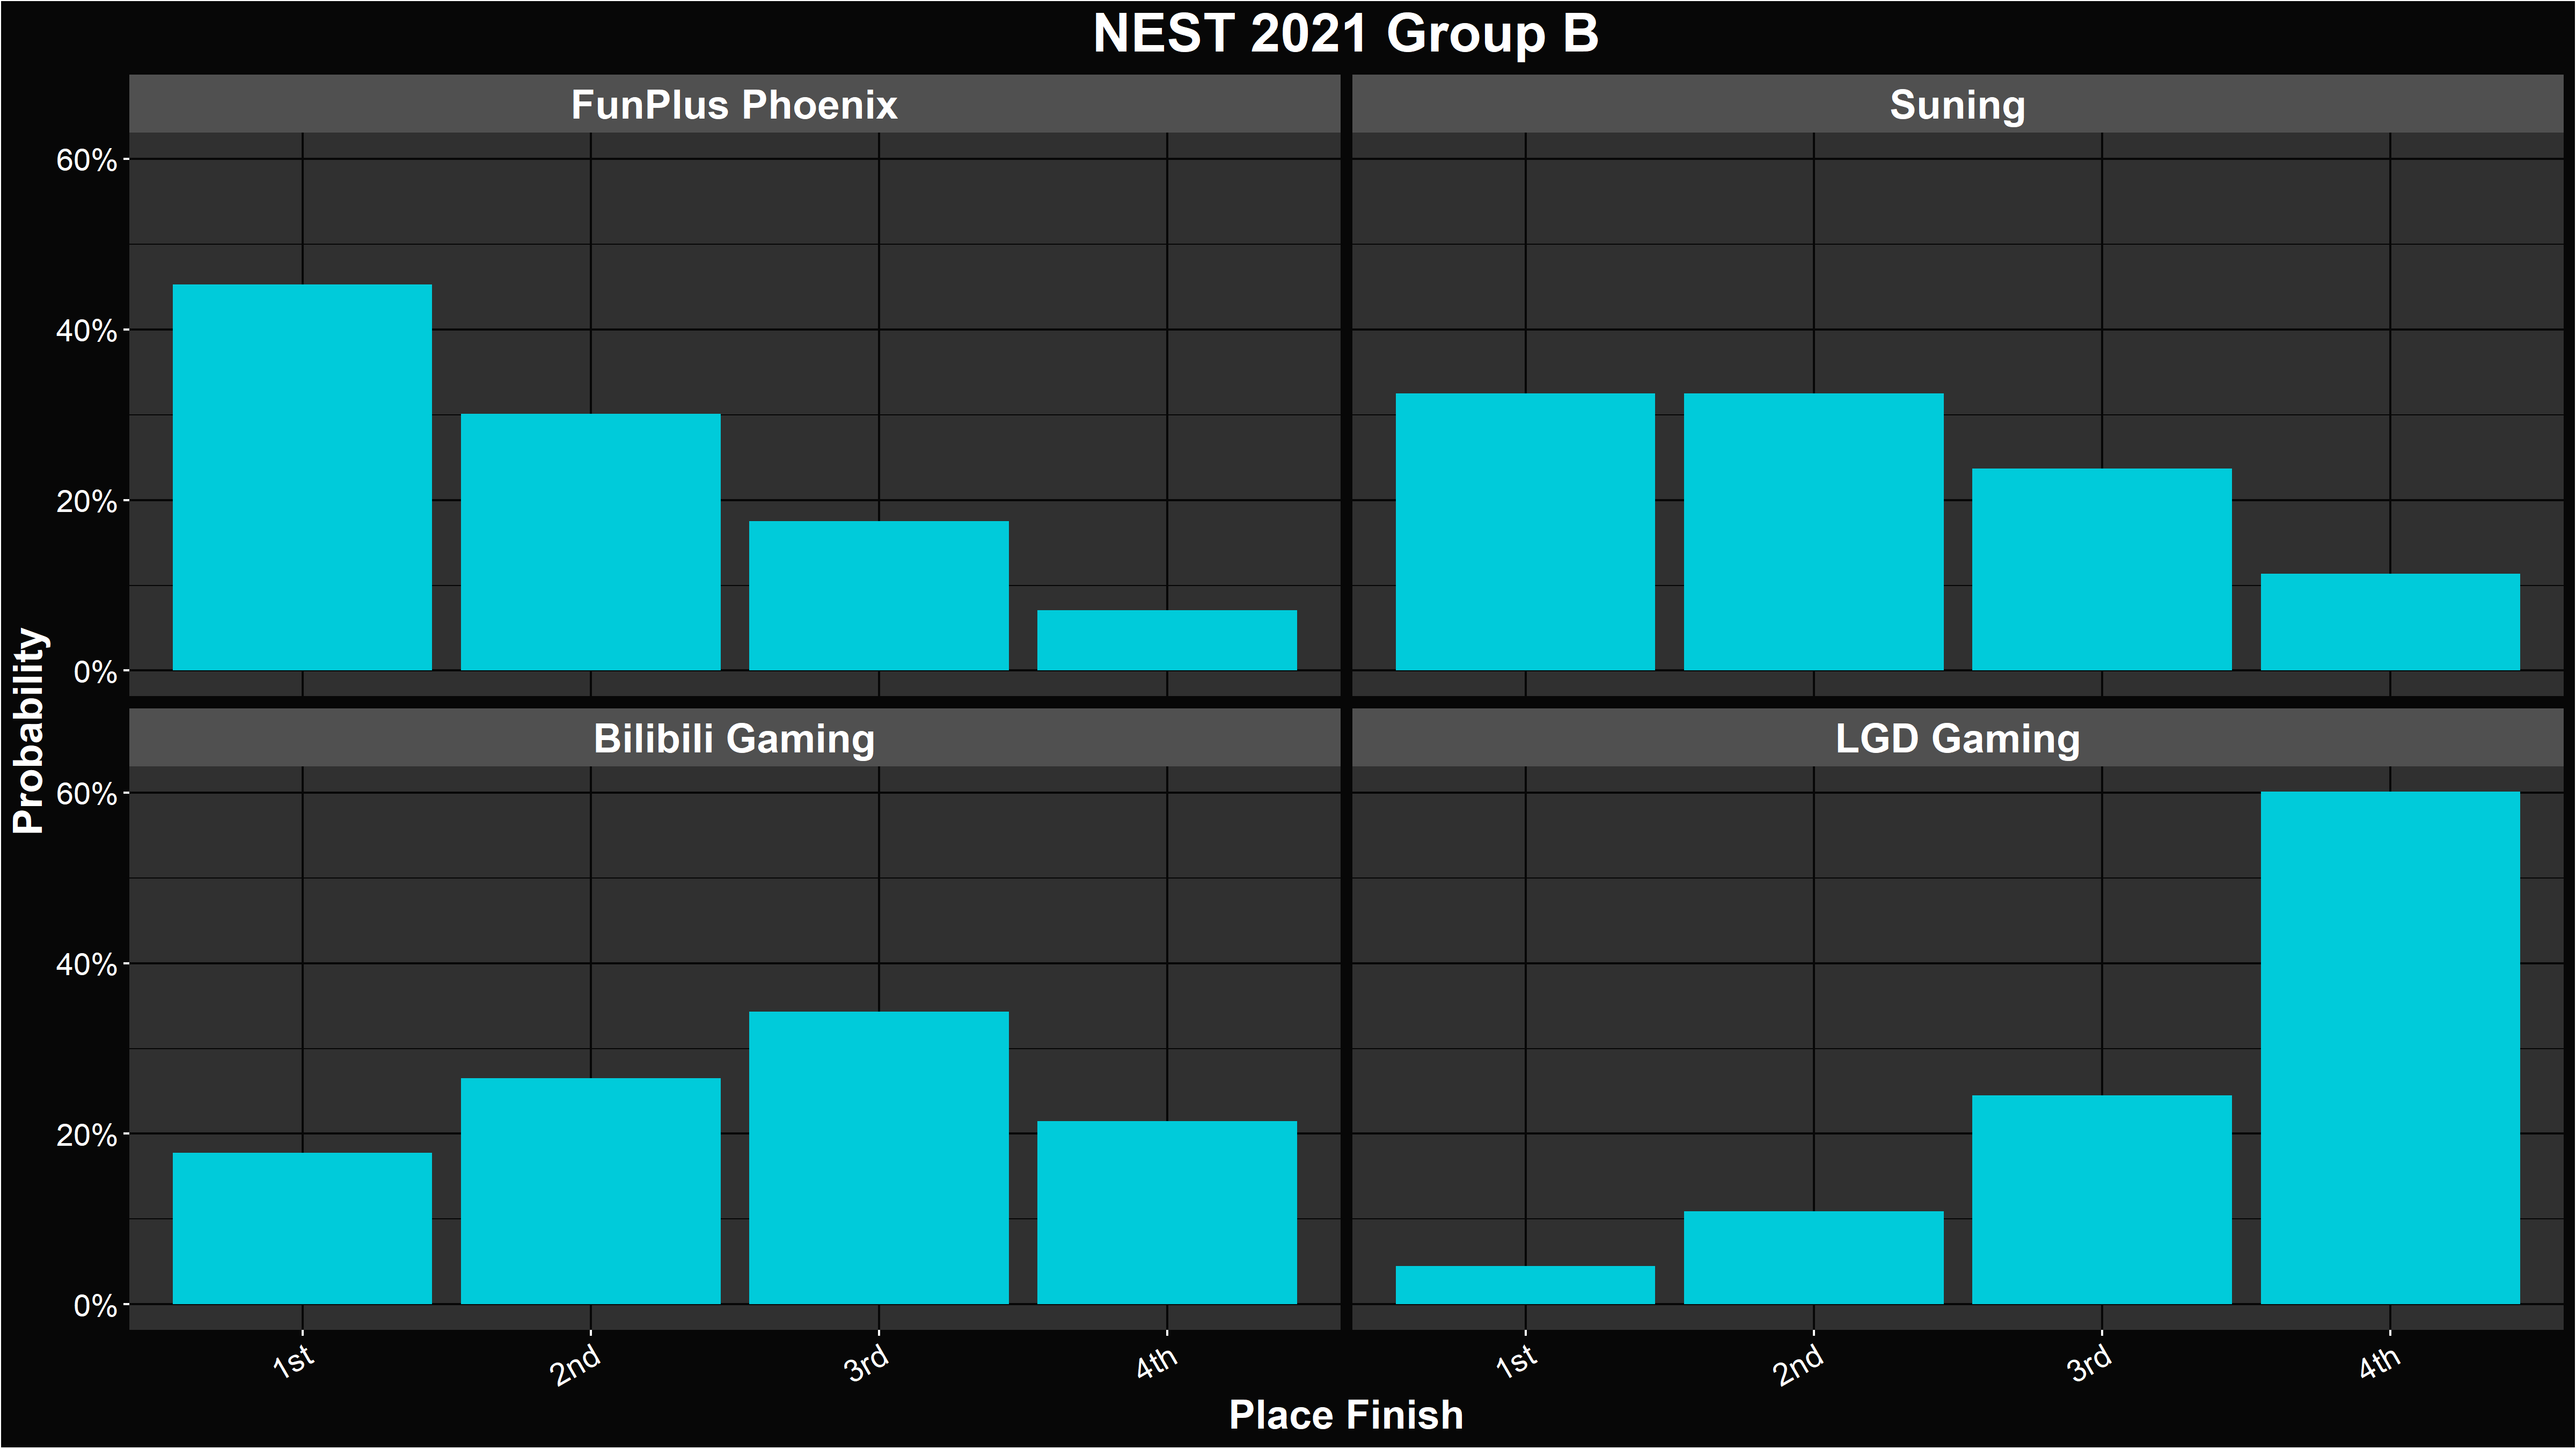 Alacrity's NEST 2021 Group B Placement Distributions